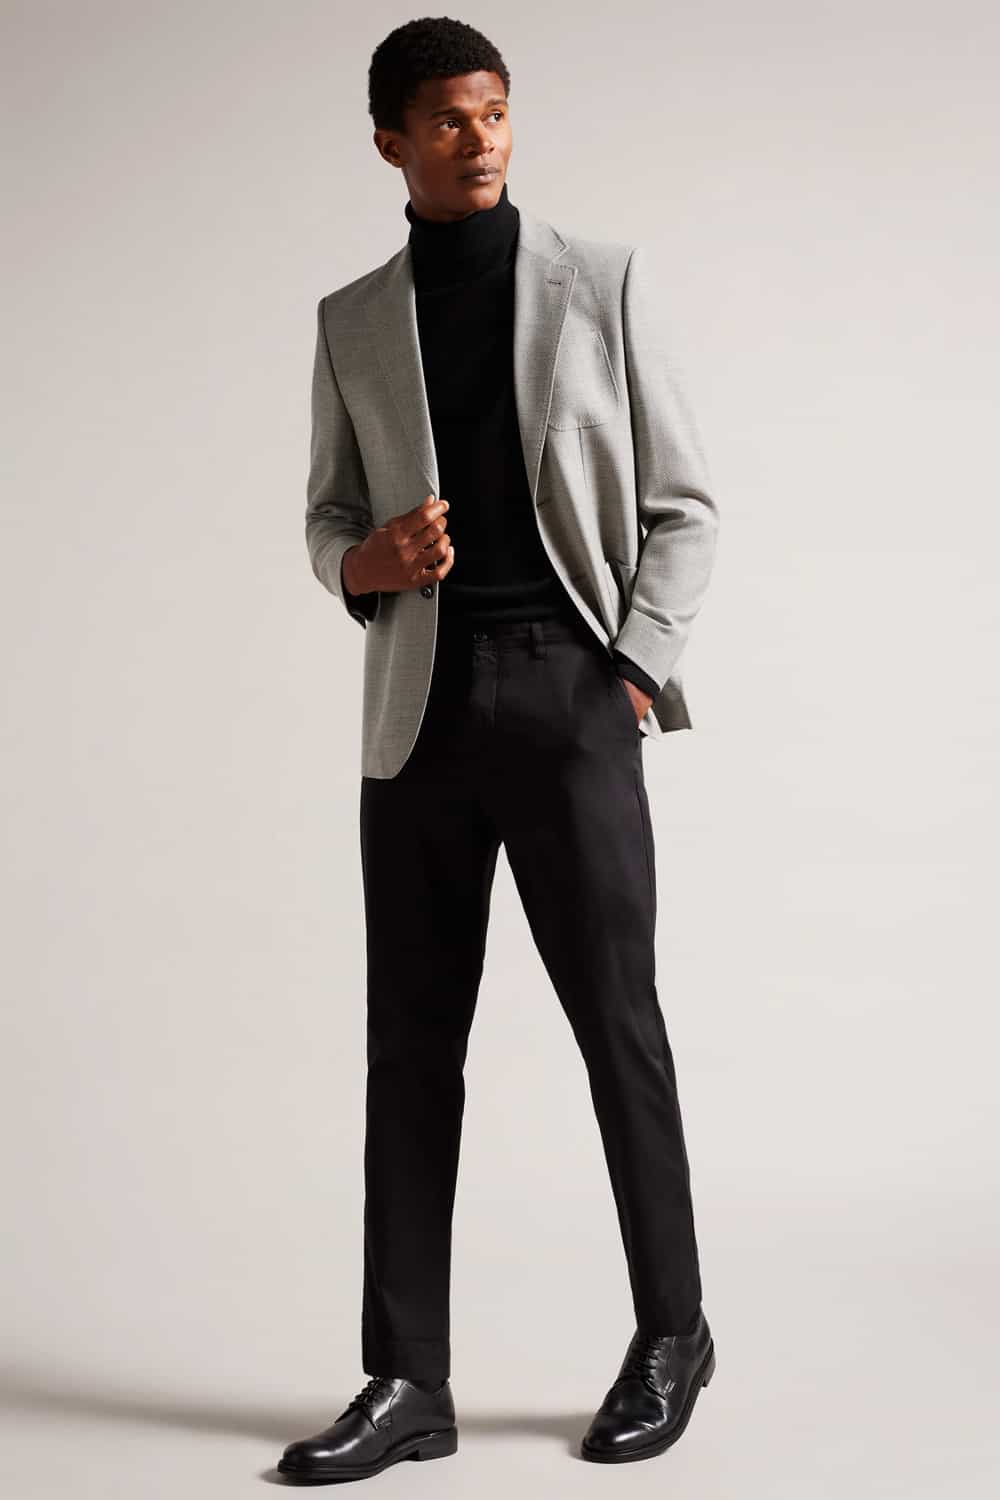 Turtleneck With A Blazer: How To Get The Look Right (16 Outfits)